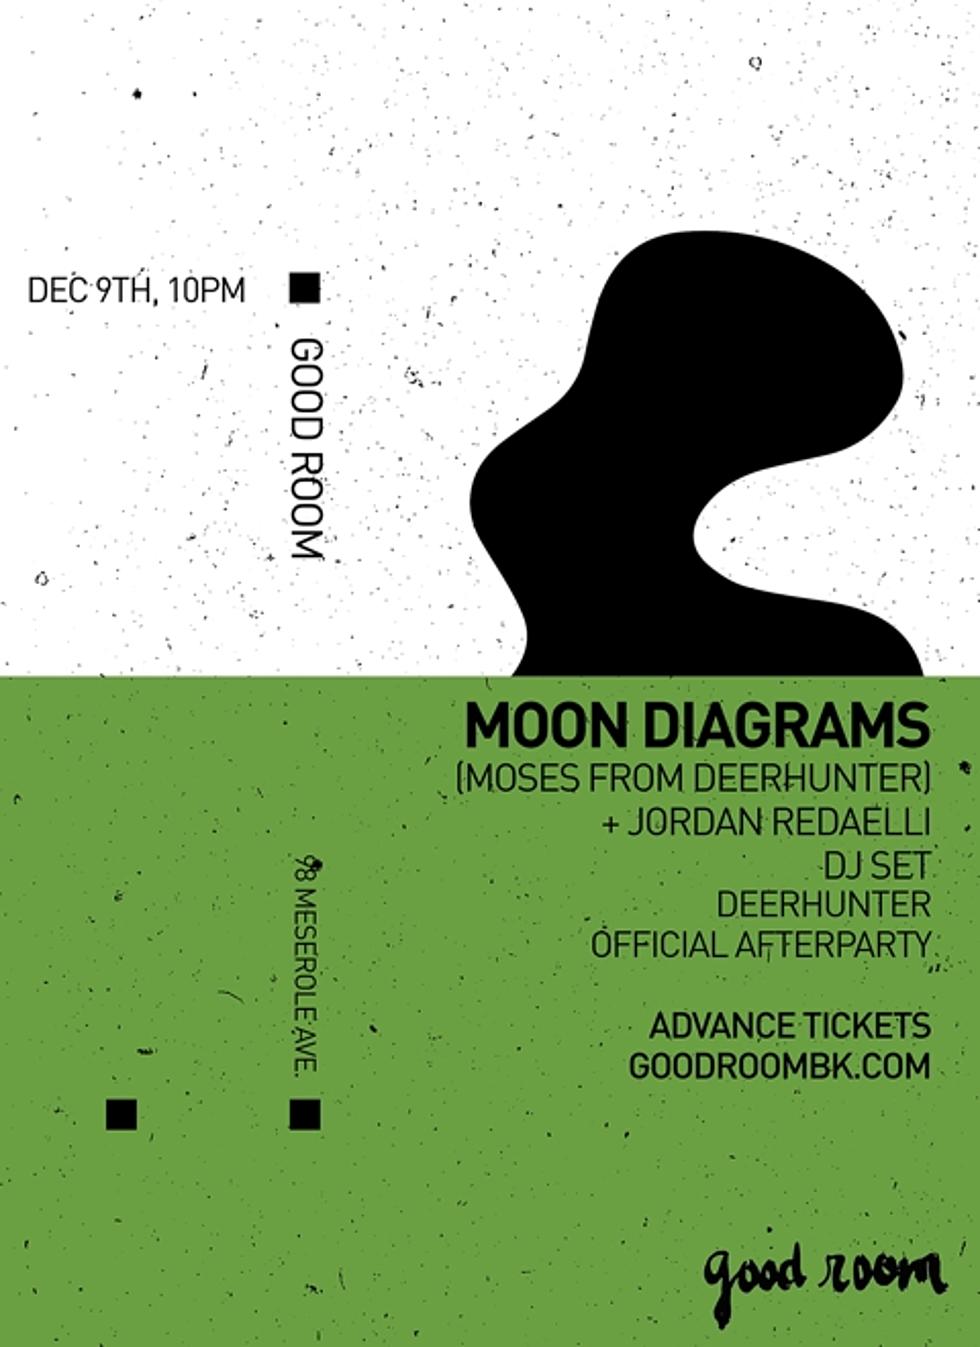 Moon Diagrams DJing an afterparty for Deerhunter's Brooklyn show too